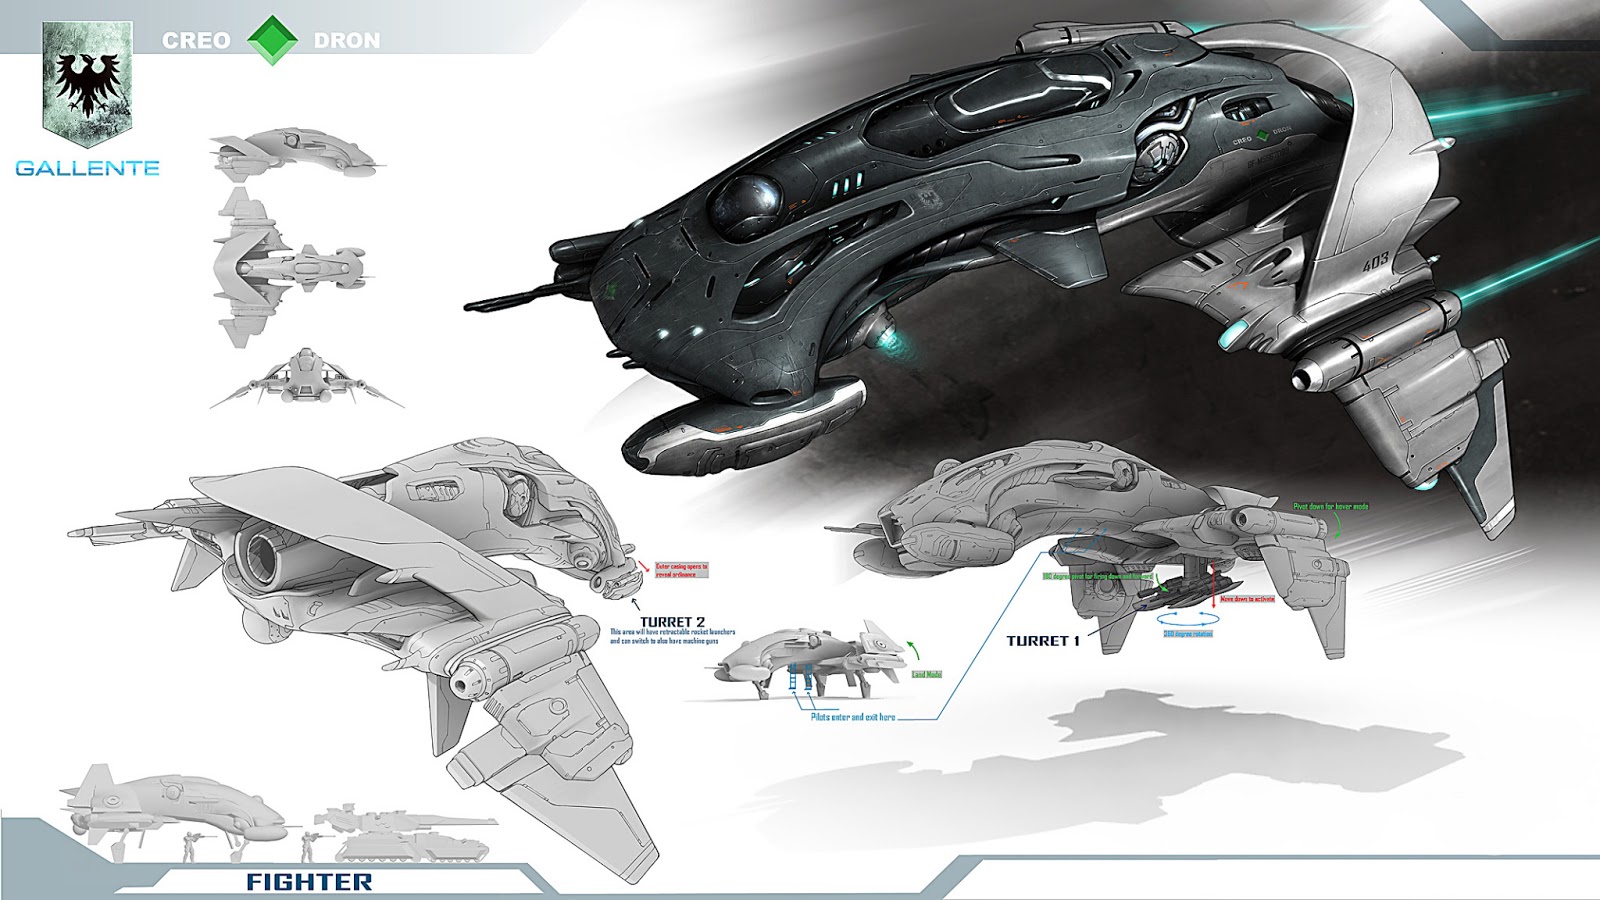 Dusters, Dust 514 fansite: What about the Fighter Aircraft?